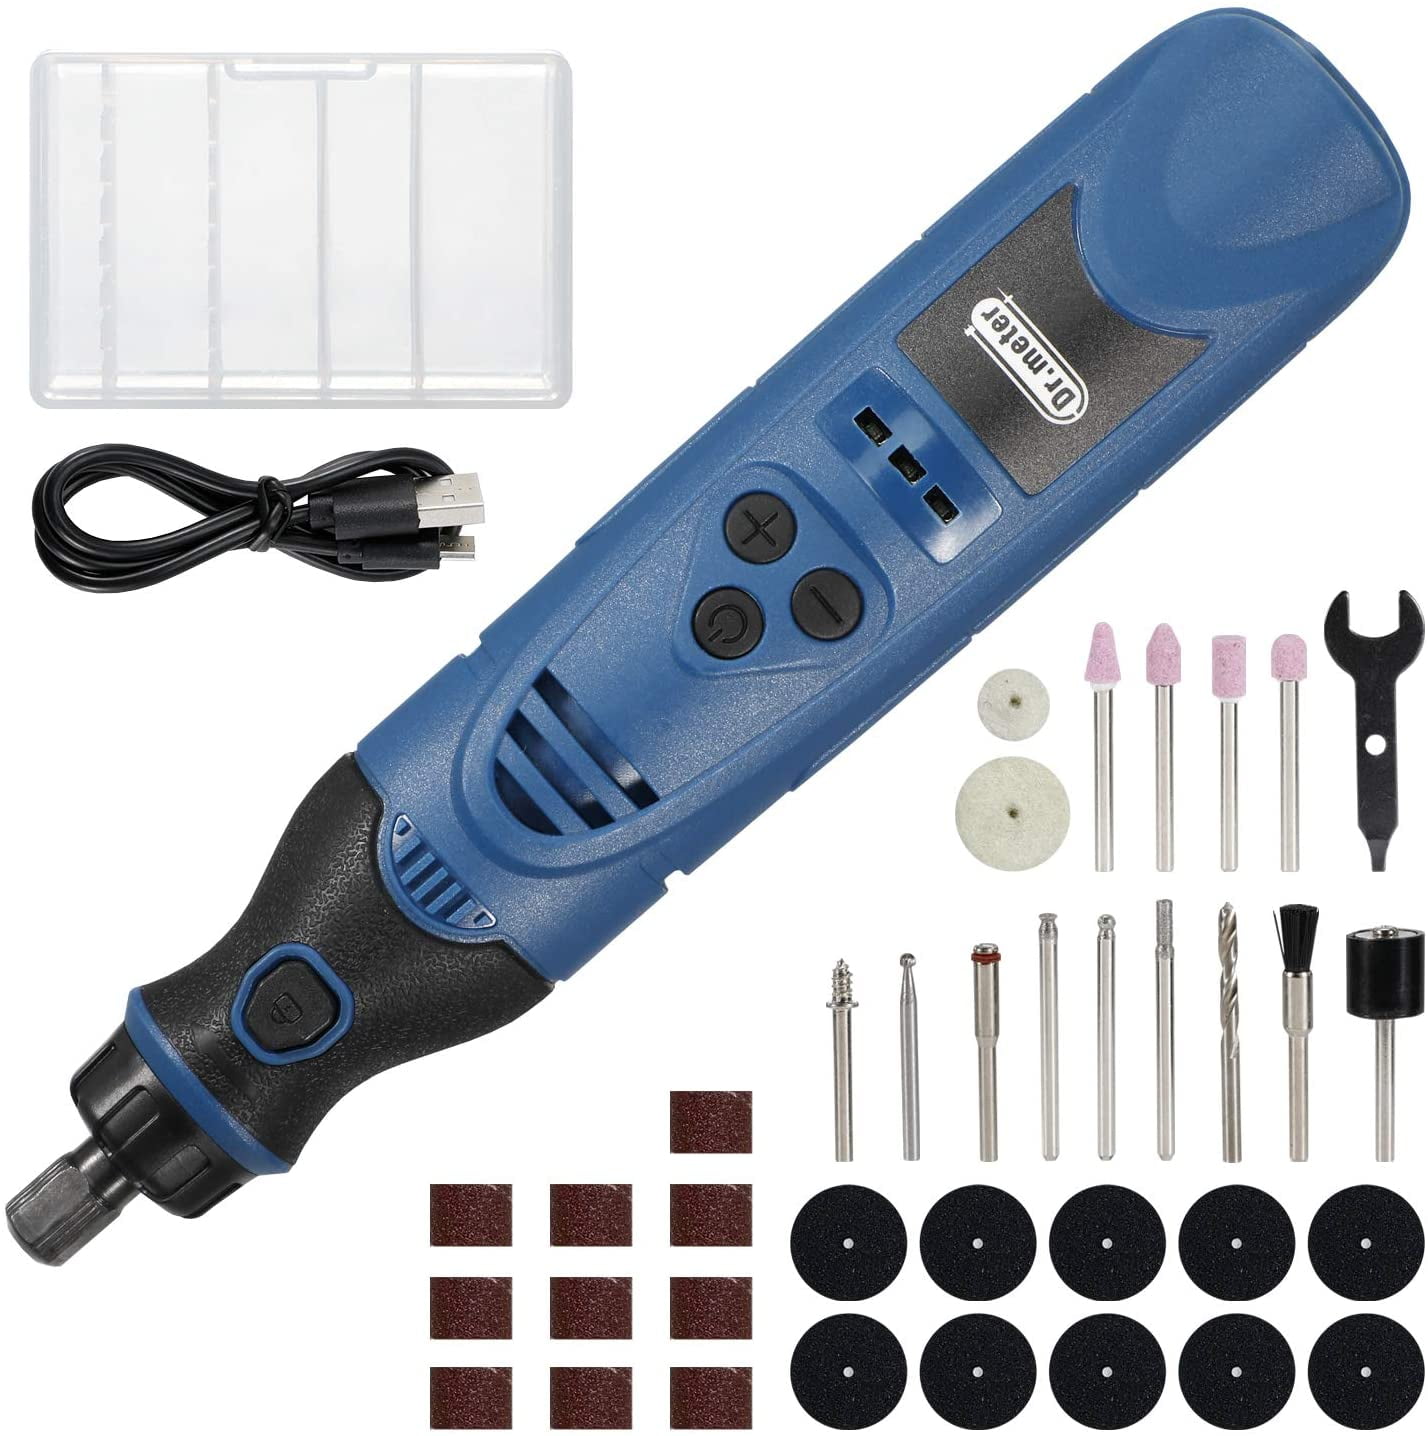 Trimming and More! Polishing 3.6V Cordless Rotary 60 Piece Tool Set Grinding Sanding 